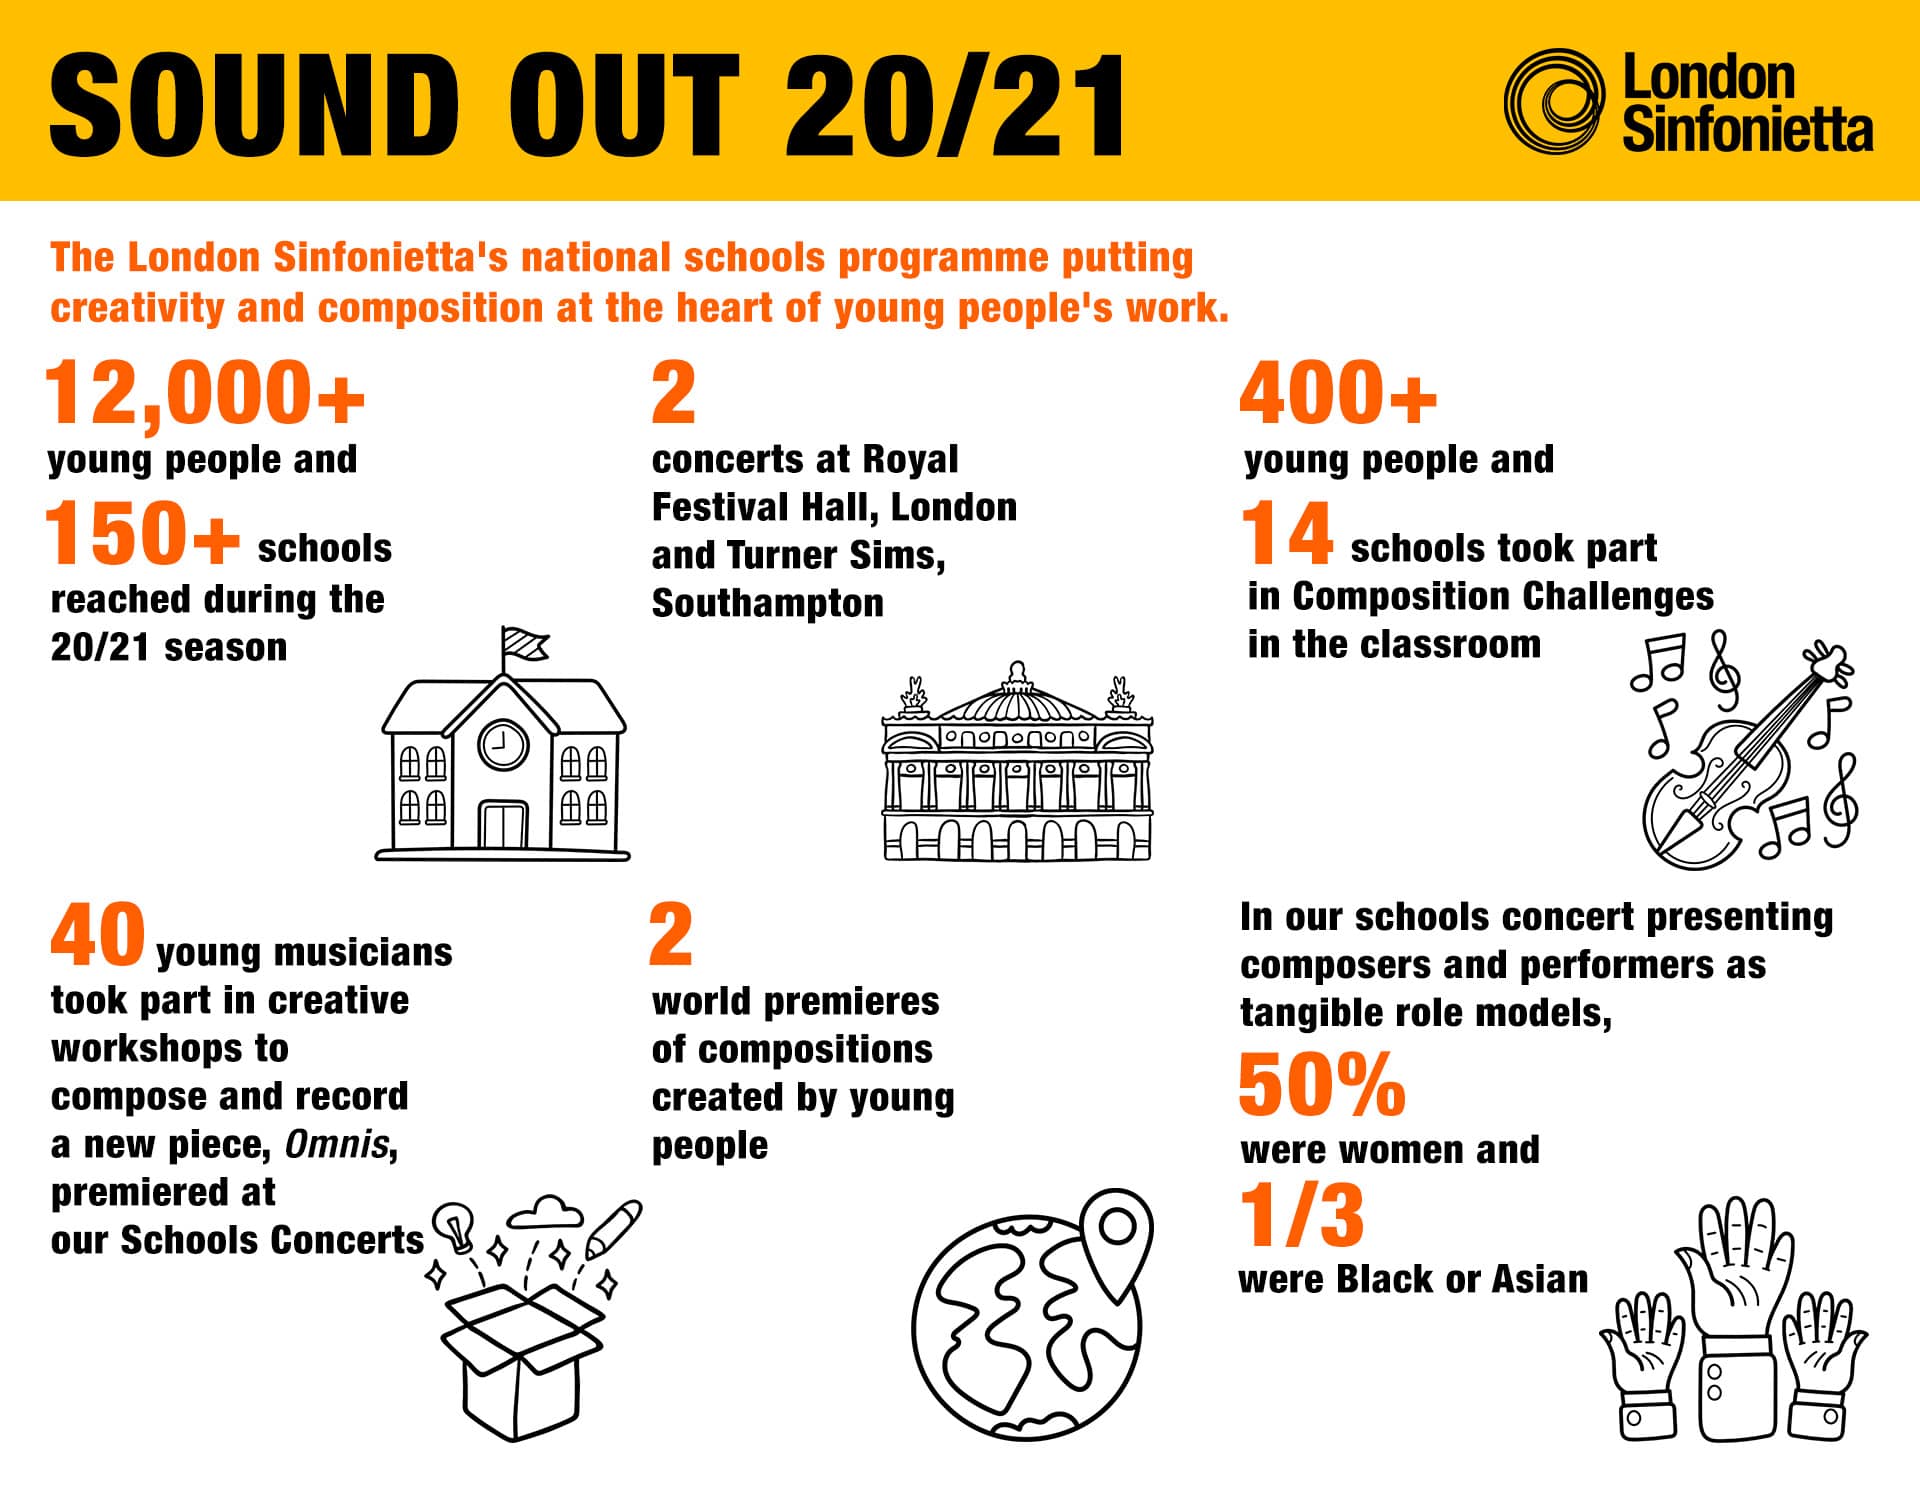 An infographic containing statistics from the Sound Out schools programme